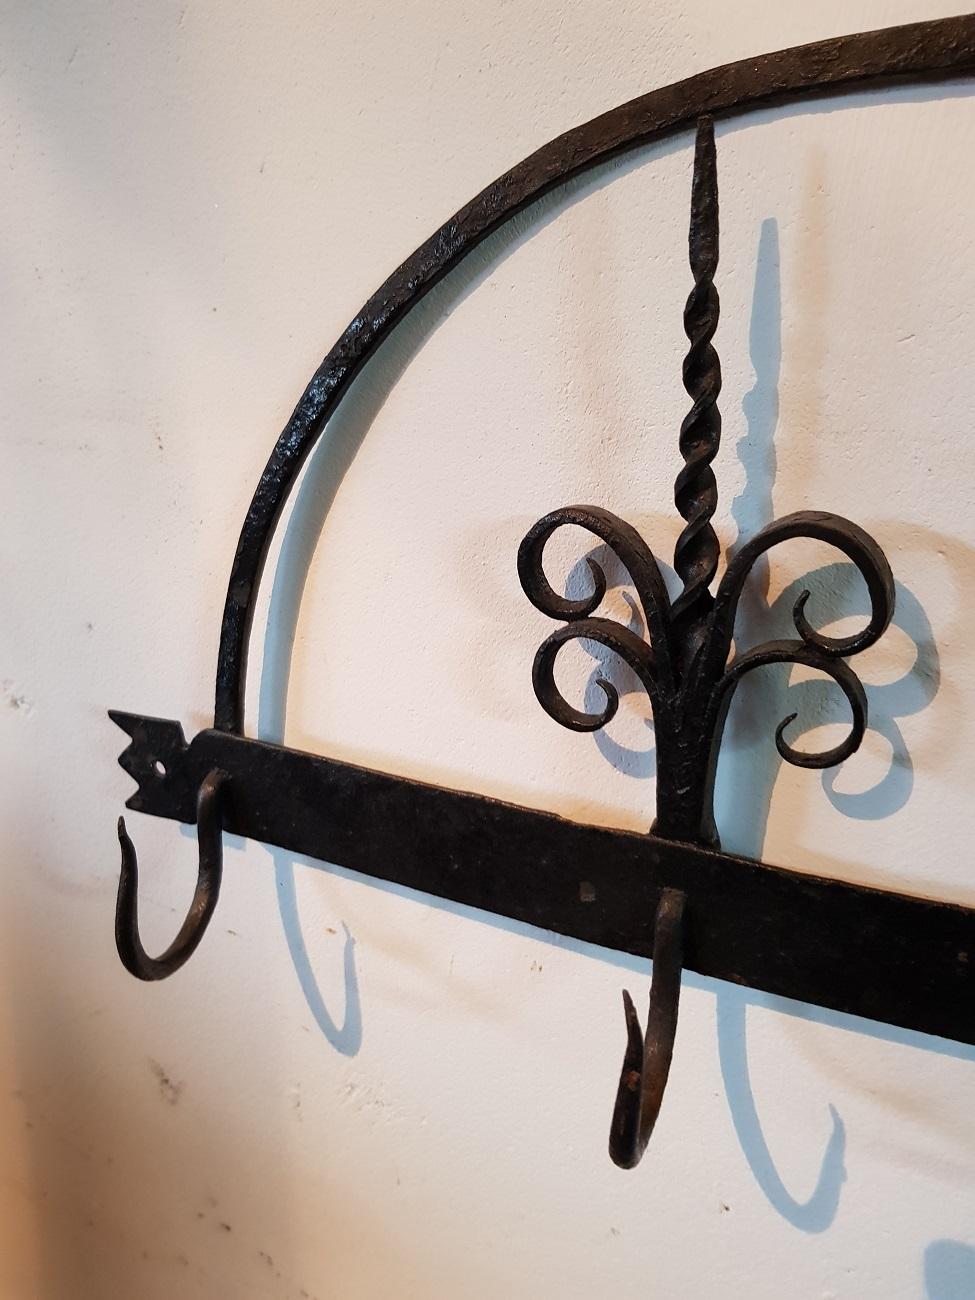 18th century Dutch wrought iron wall rack for fireplace tools, truly a beautiful piece of craftsmanship.

The measurements are,
Depth 5 cm/ 1.9 inch.
Width 60 cm/ 23.6 inch.
Height 27 cm/ 10.6 inch.